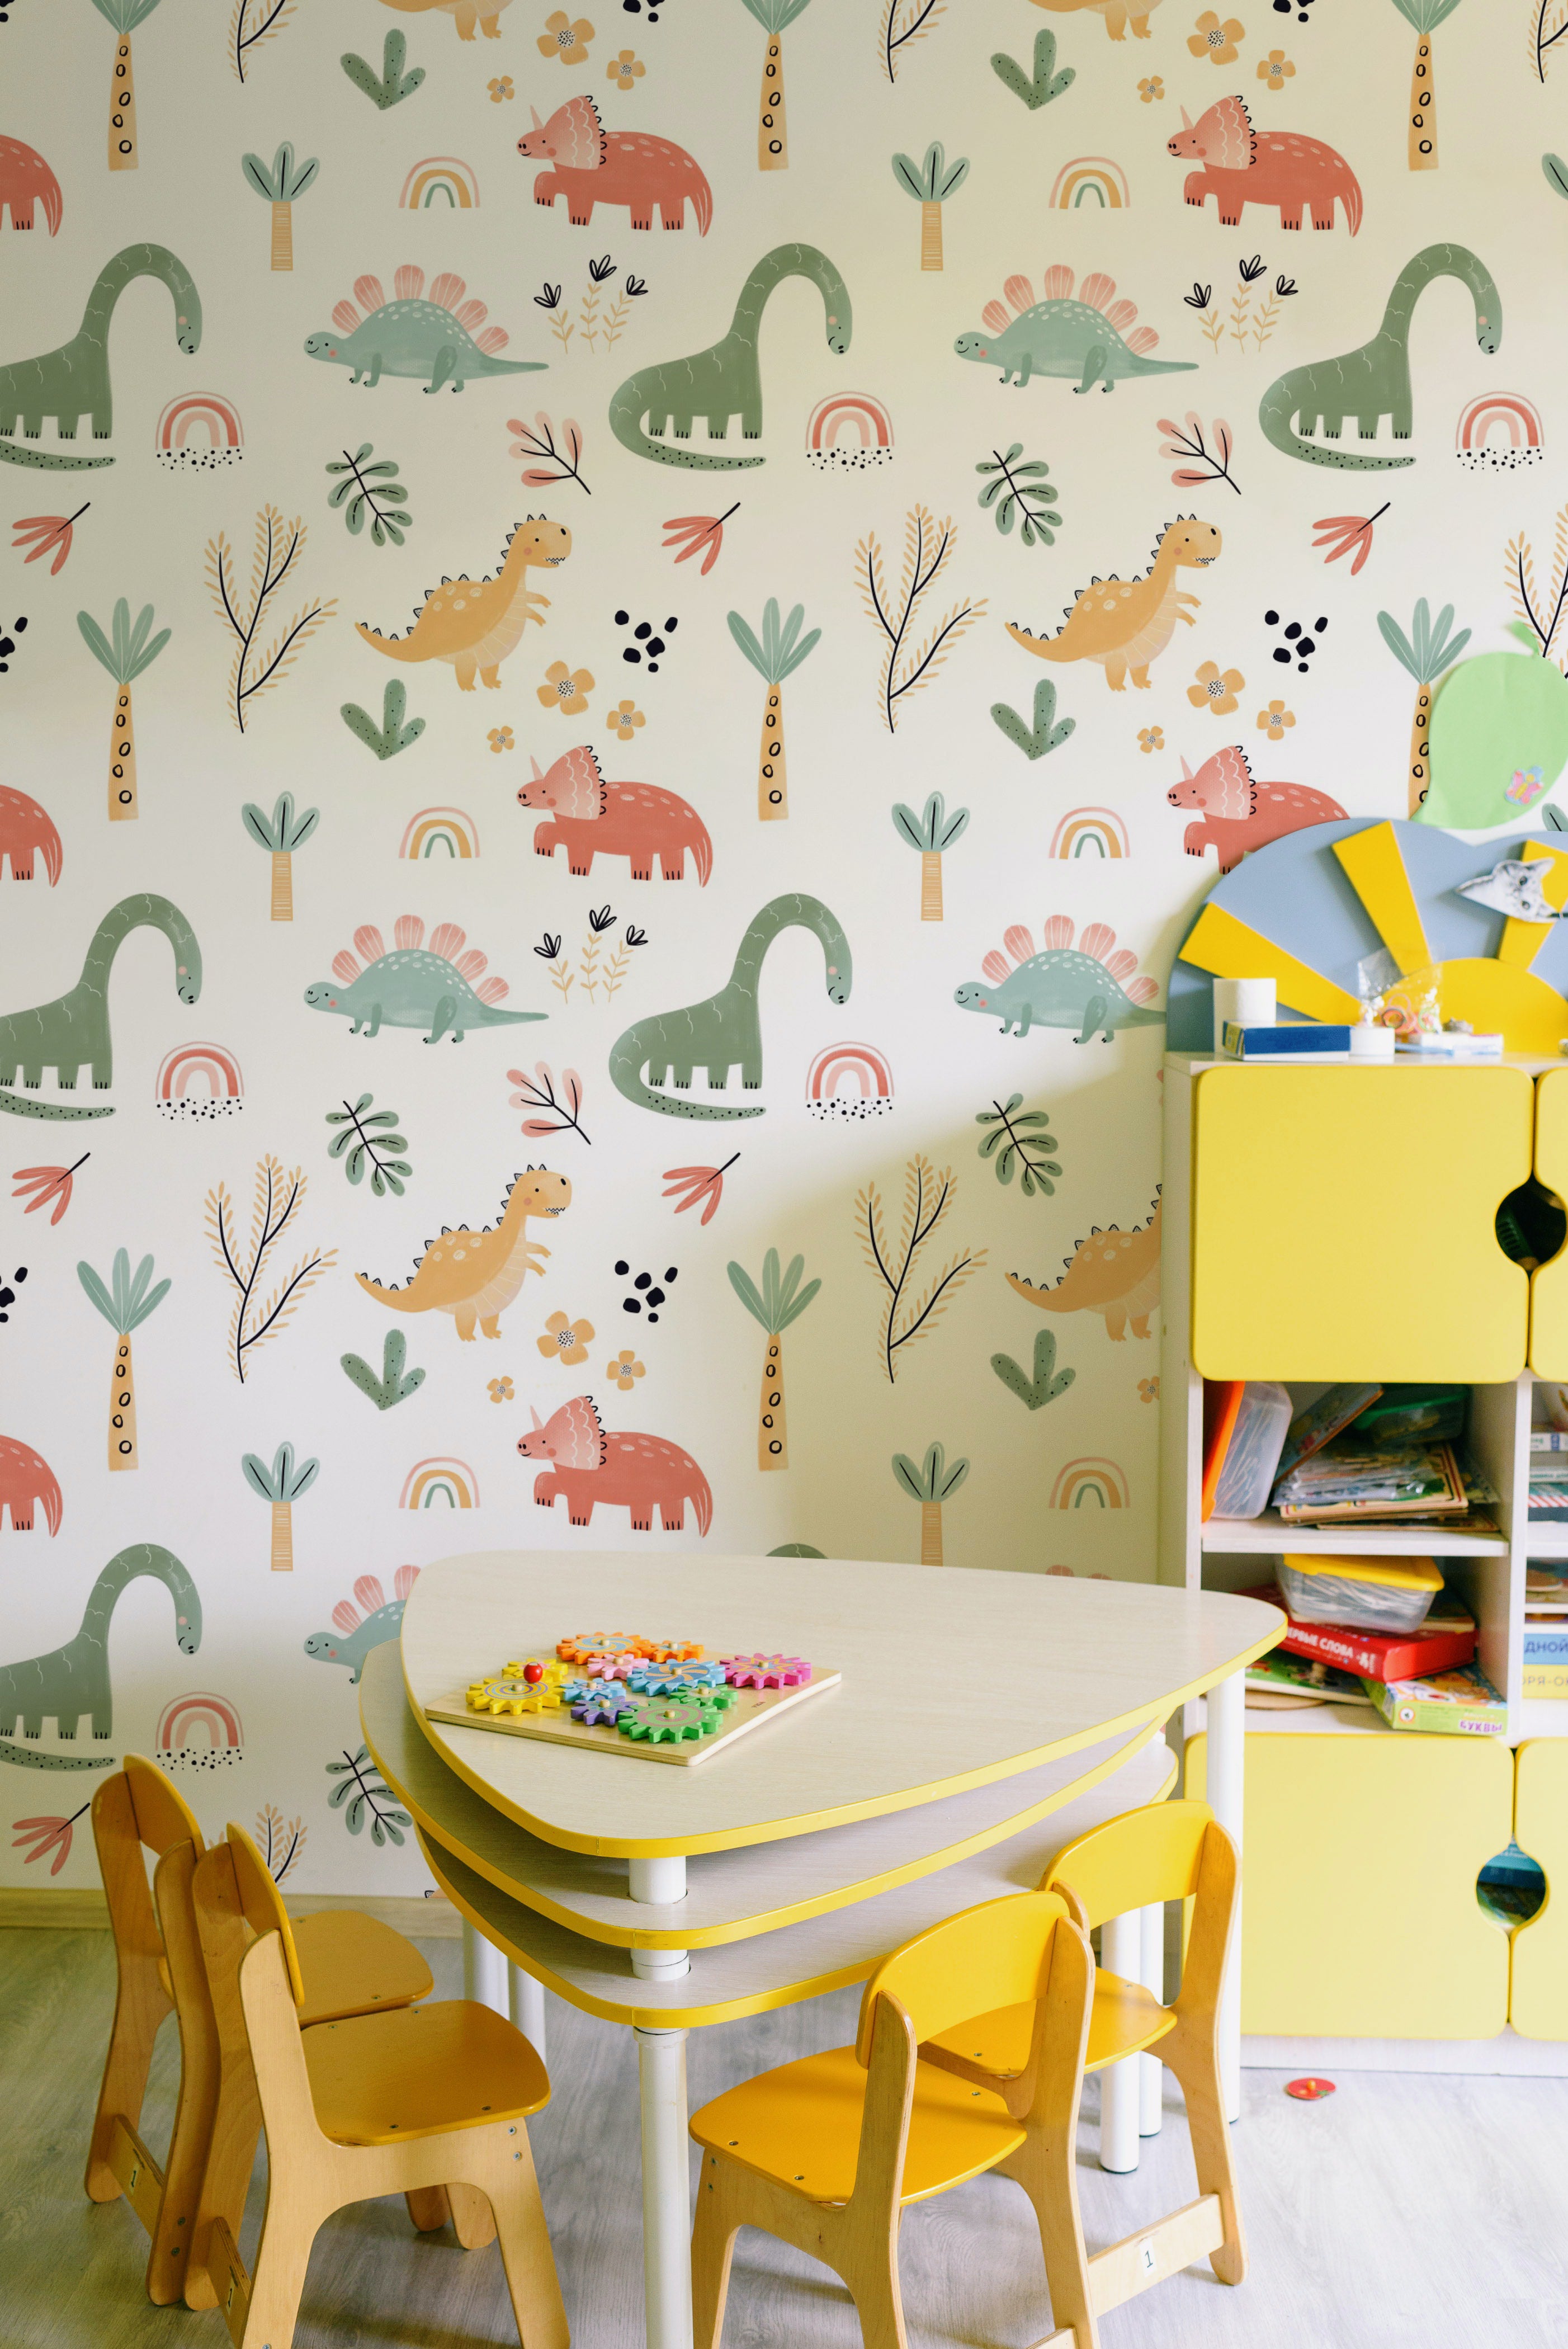 A vibrant children's room corner with Dinosaur Nursery Wallpaper enveloping the space in a scene of prehistoric playfulness, complemented by bright yellow storage and toys, which add a lively contrast to the gentle wall pattern.